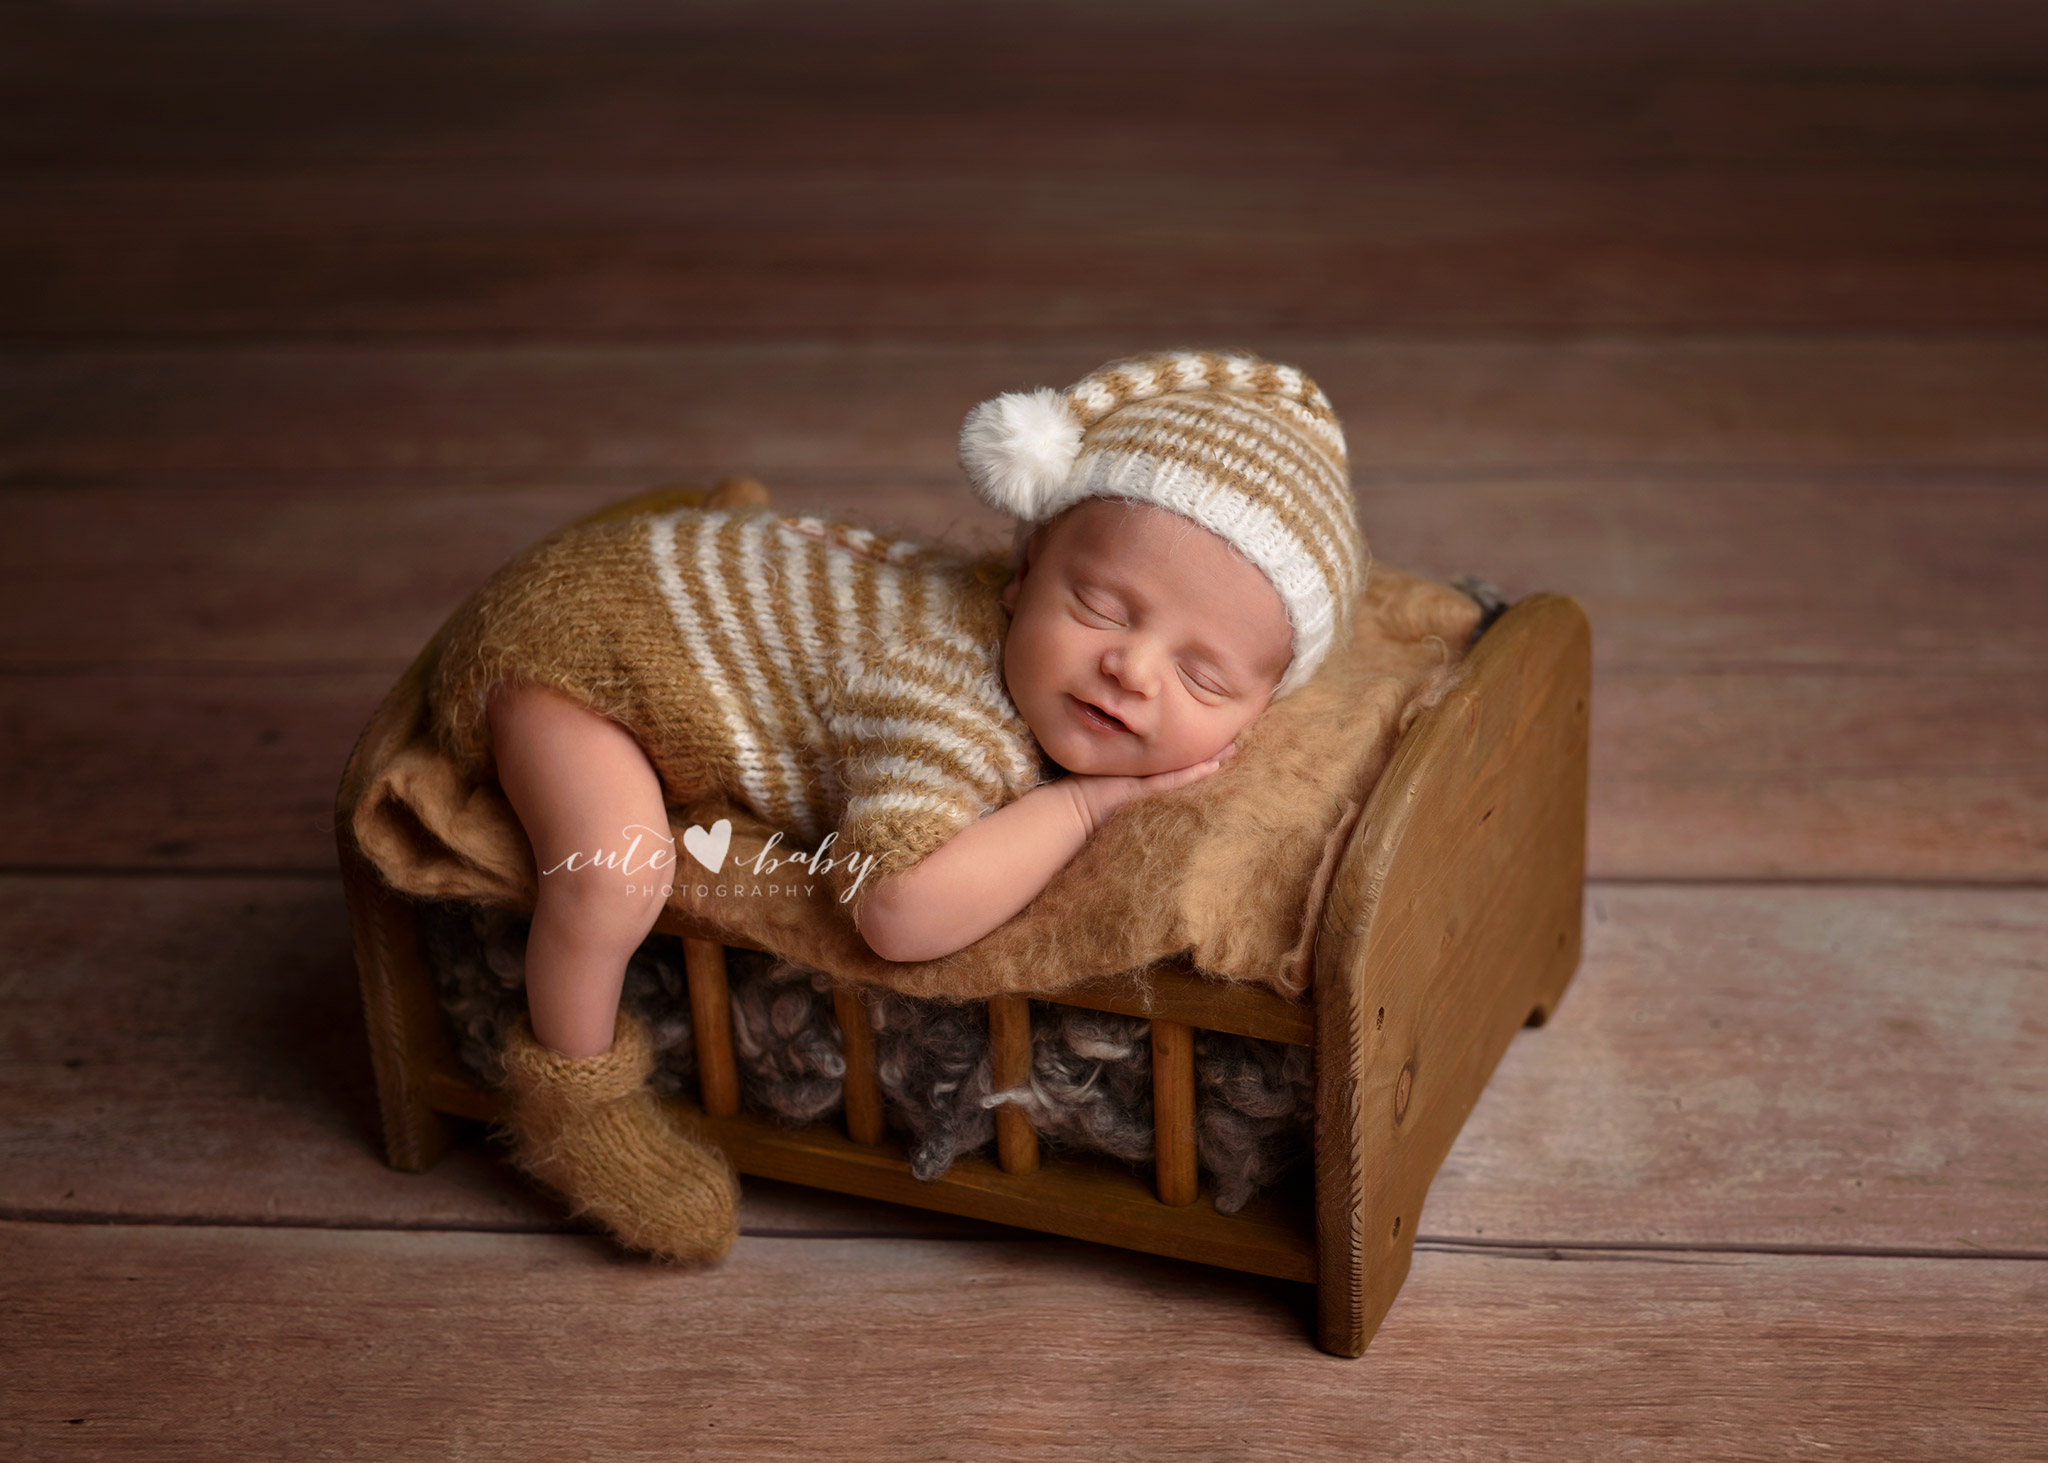 Newborn Photography Manchester by Cute Baby Photography, Studio Newborn photography, Baby Photography, Newborn Session Manchester
